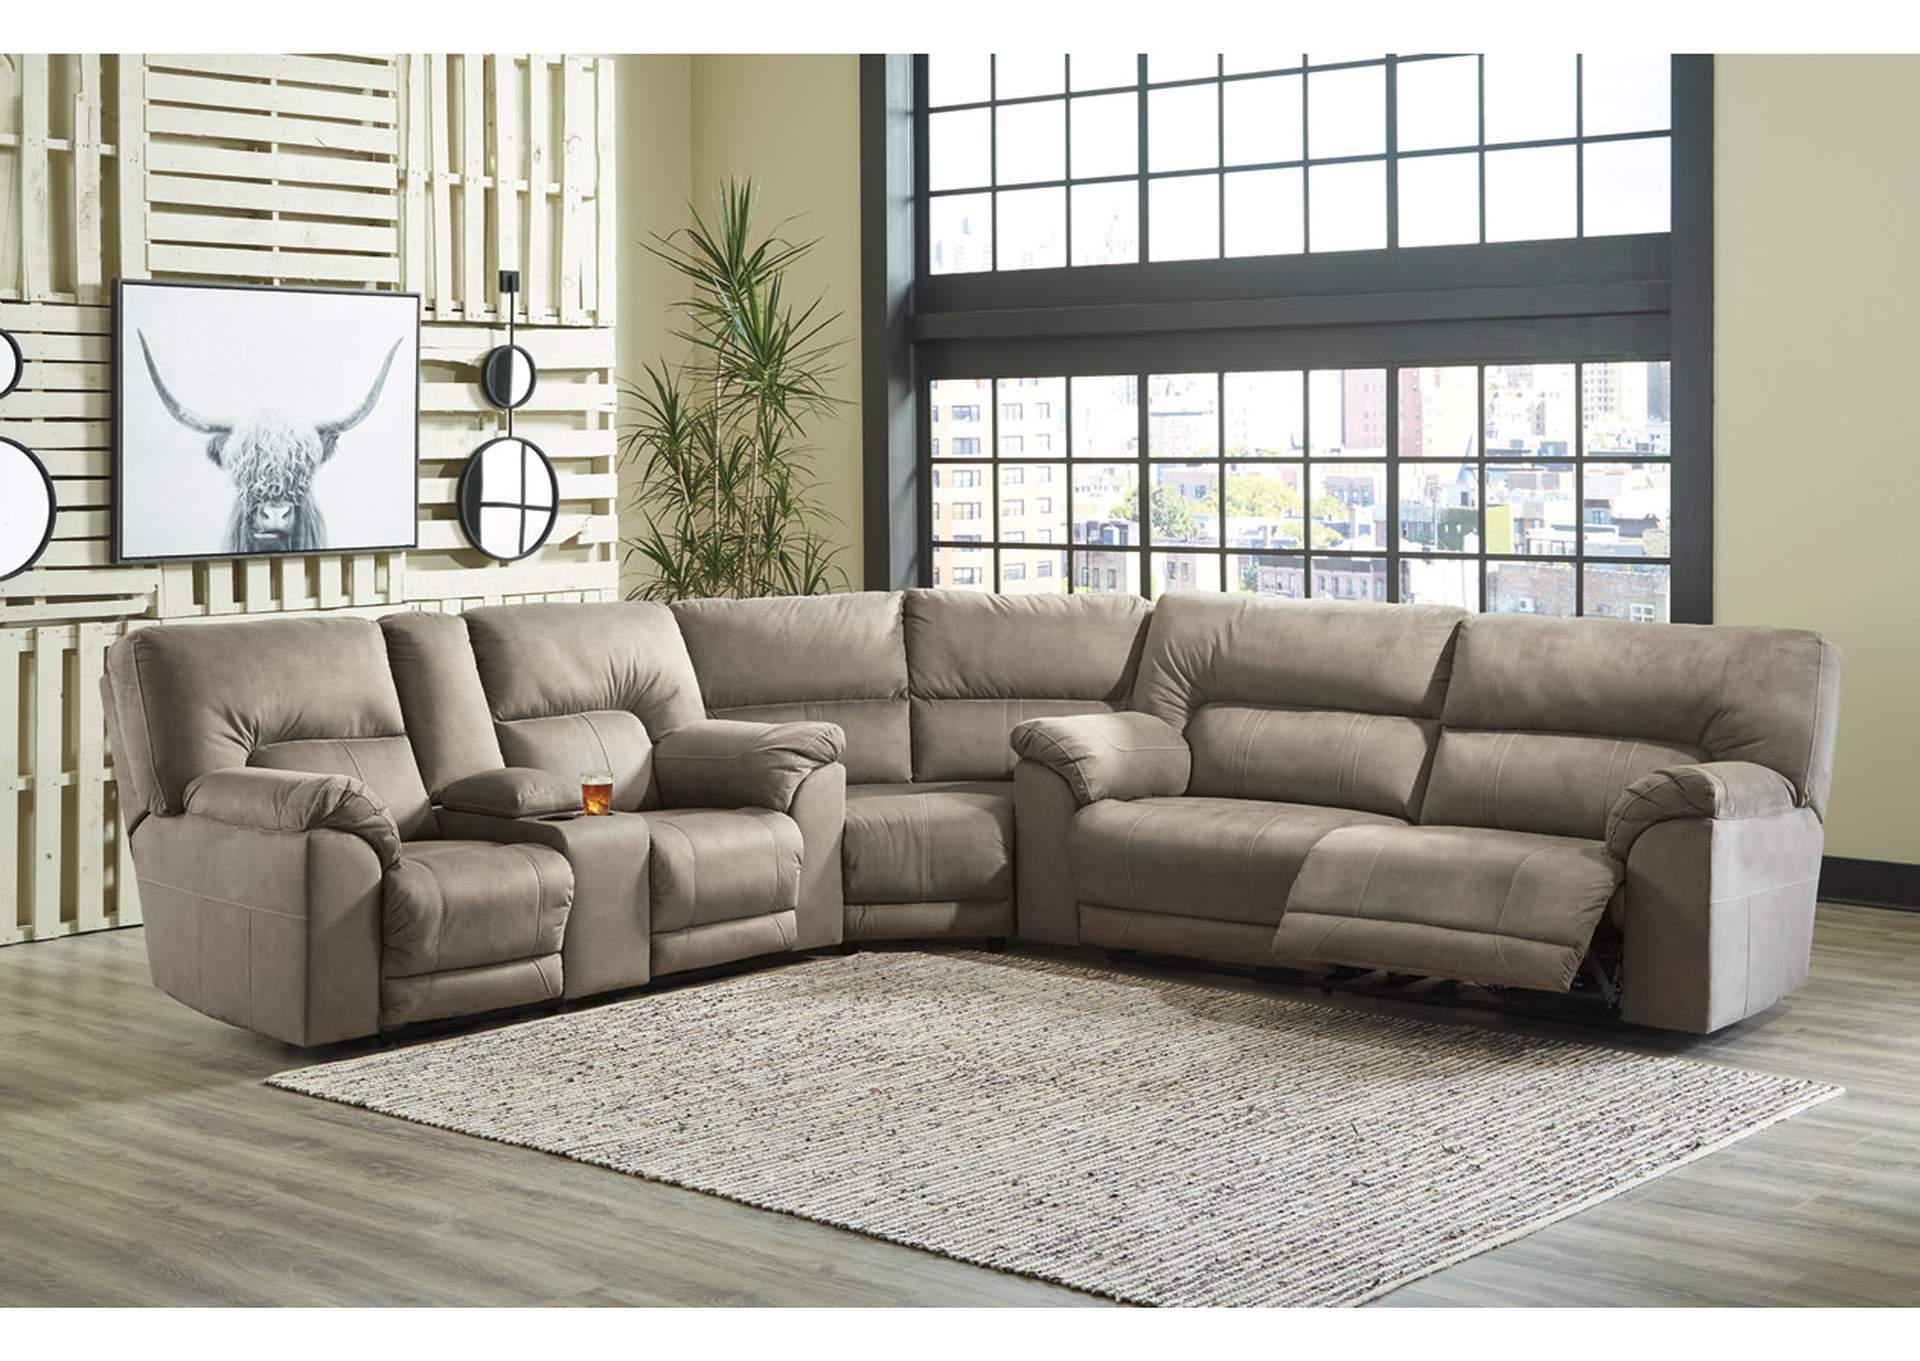 Cavalcade 3-Piece Reclining Sectional,Benchcraft